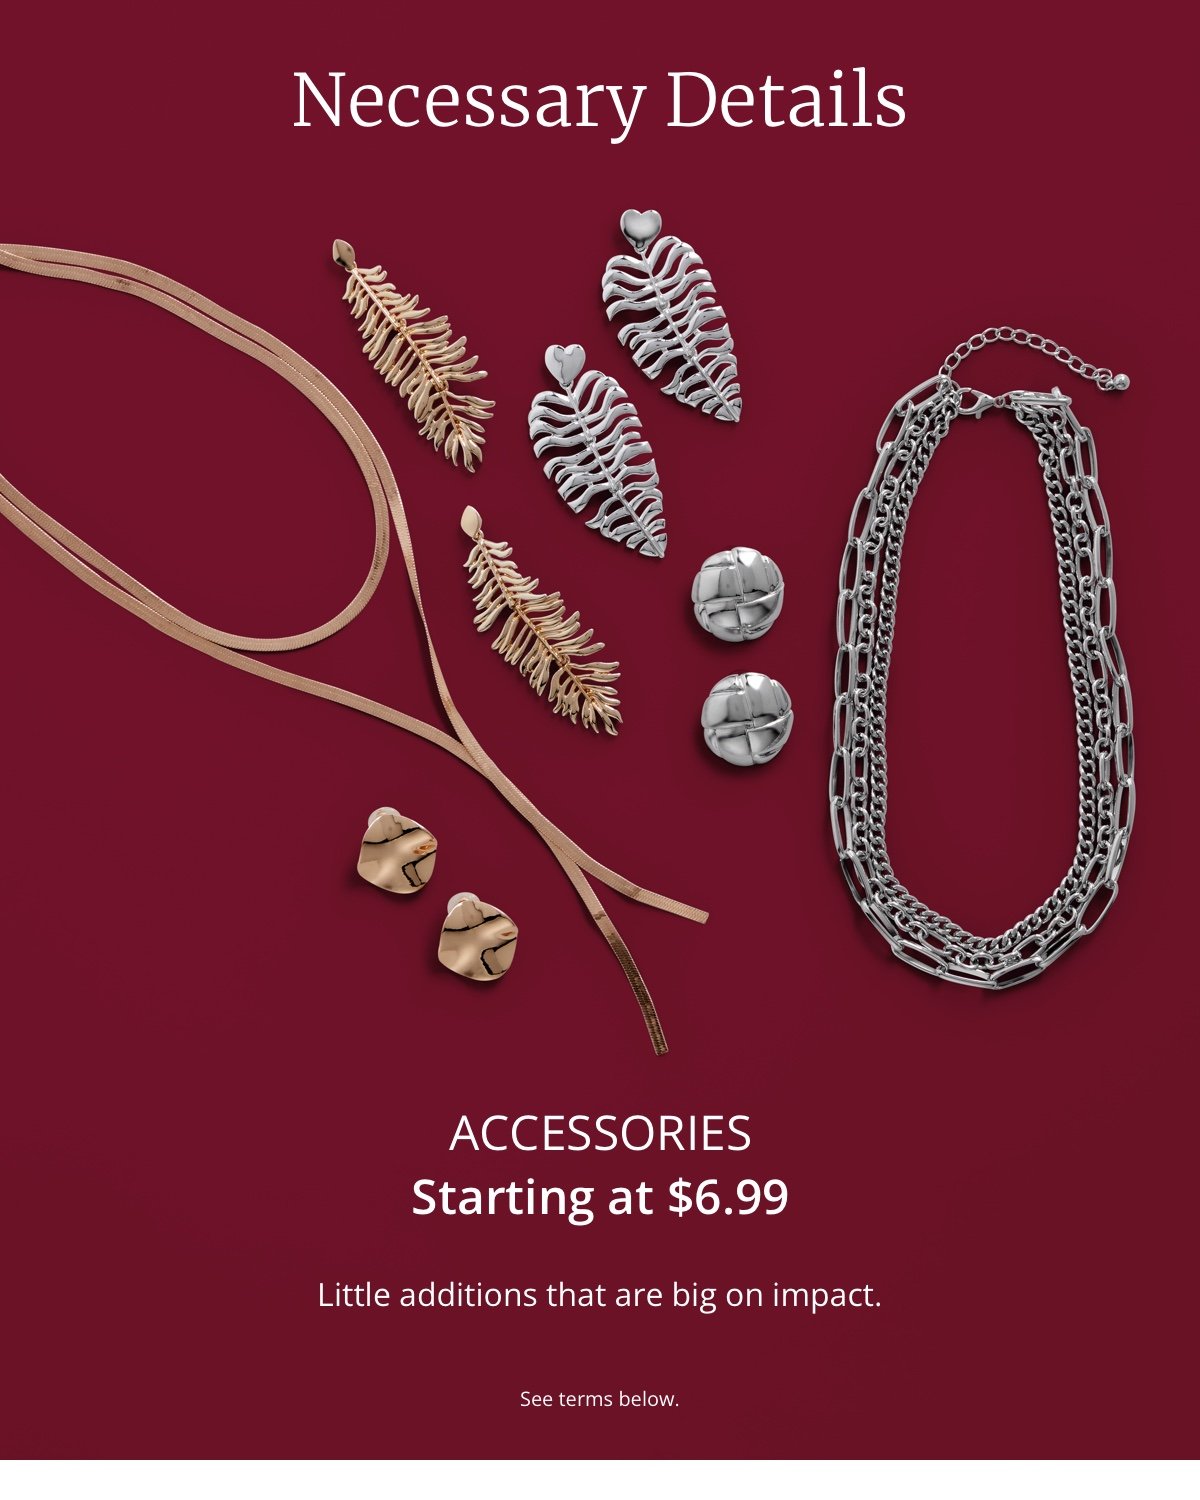 Necessary Details. Accessories Starting at \\$6.99. Little additions that are big on impact. See terms below.